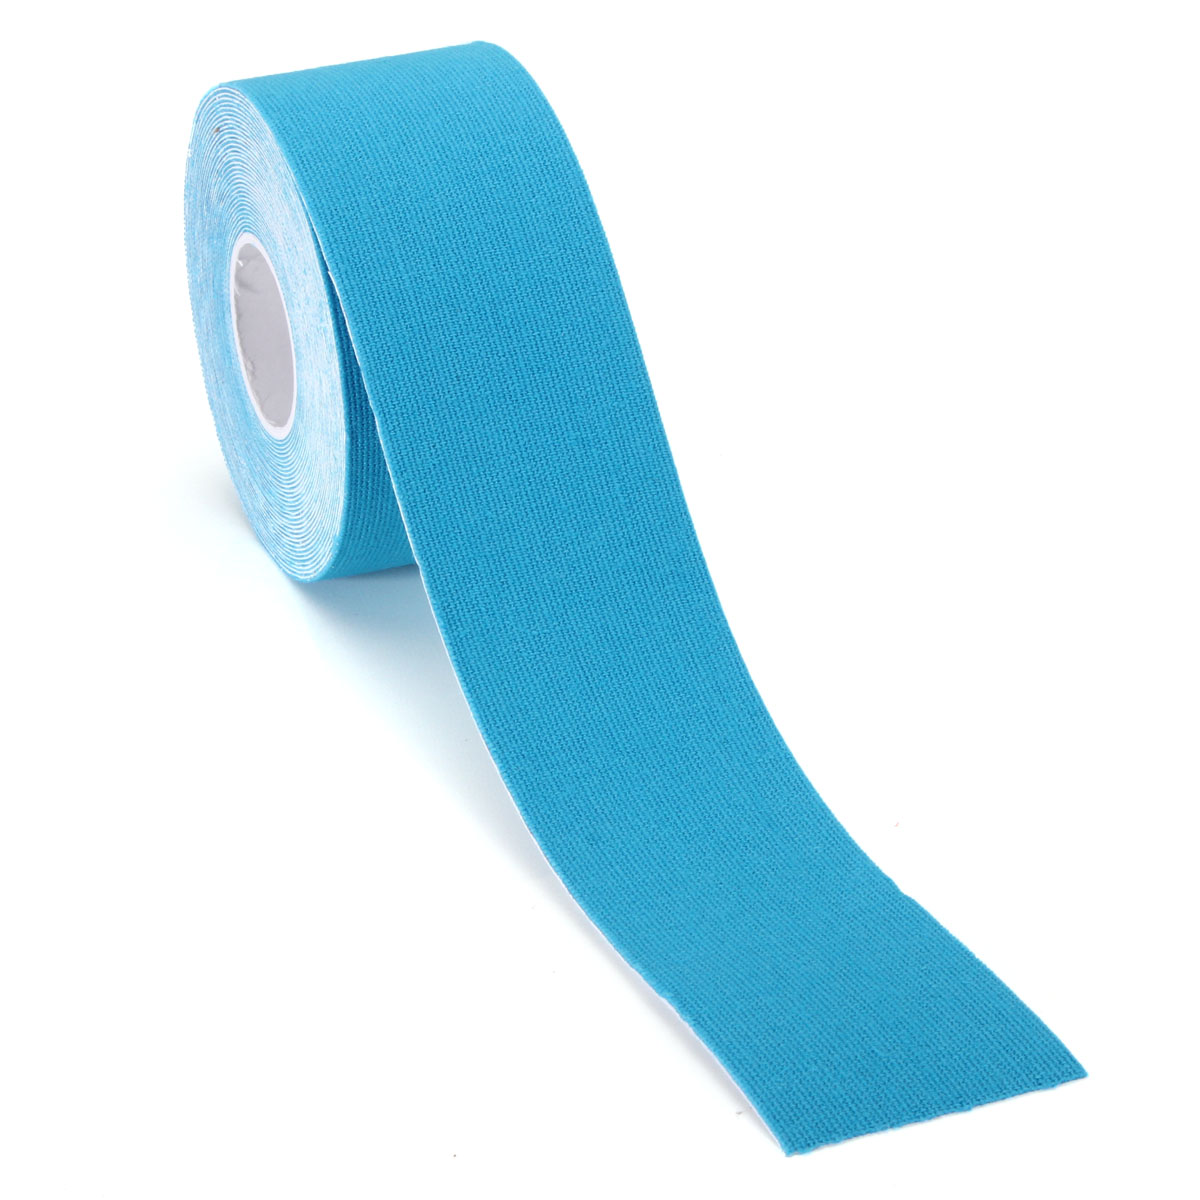 1pc-5m-Self-adhesiv-Elastic-Sport-Muscle-Sport-Tape-Bandage-Physio-Strain-Support-Pain-Relief-Roll-1123772